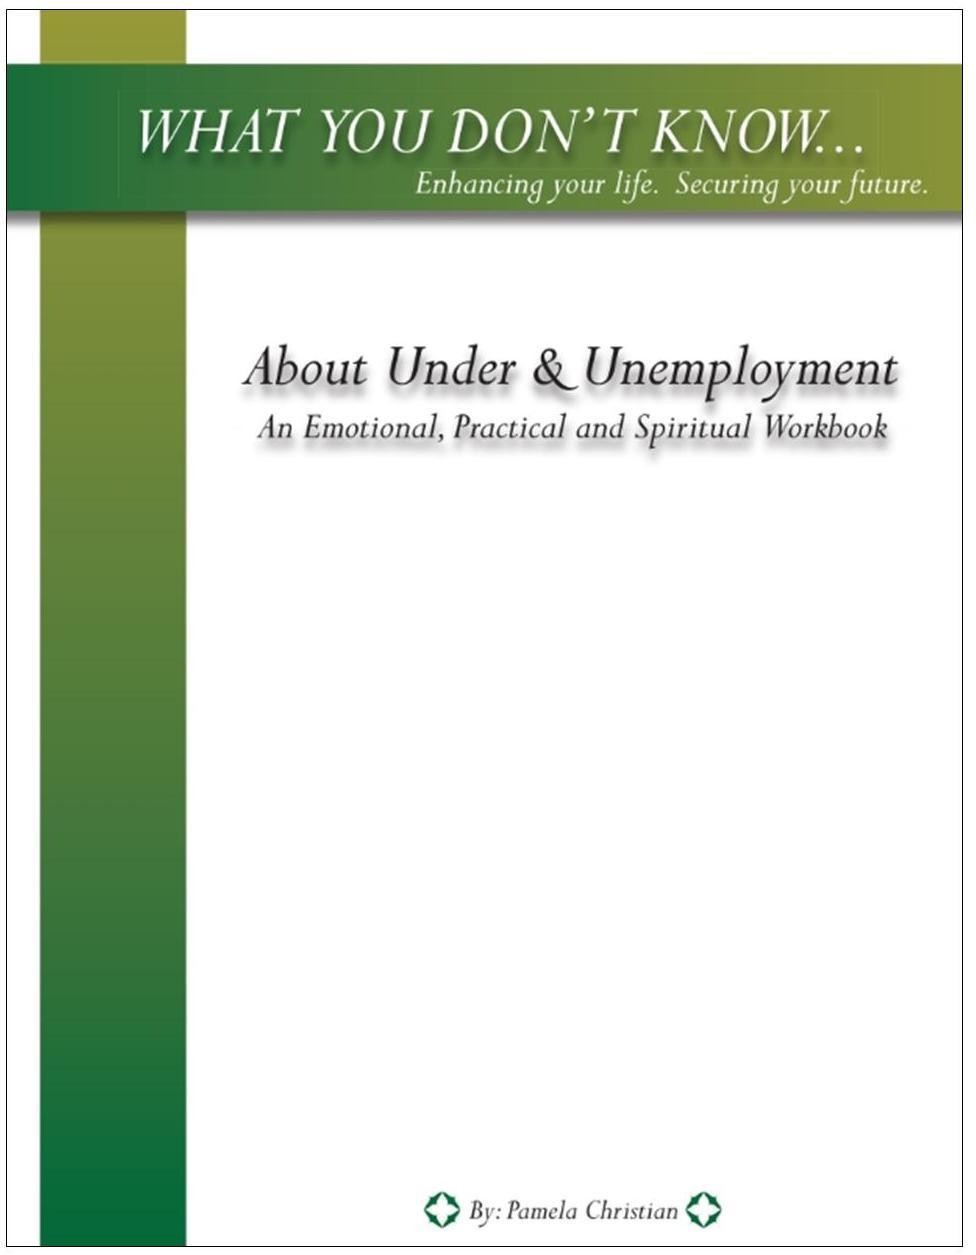 What You Don't Know About Under and Unemployment